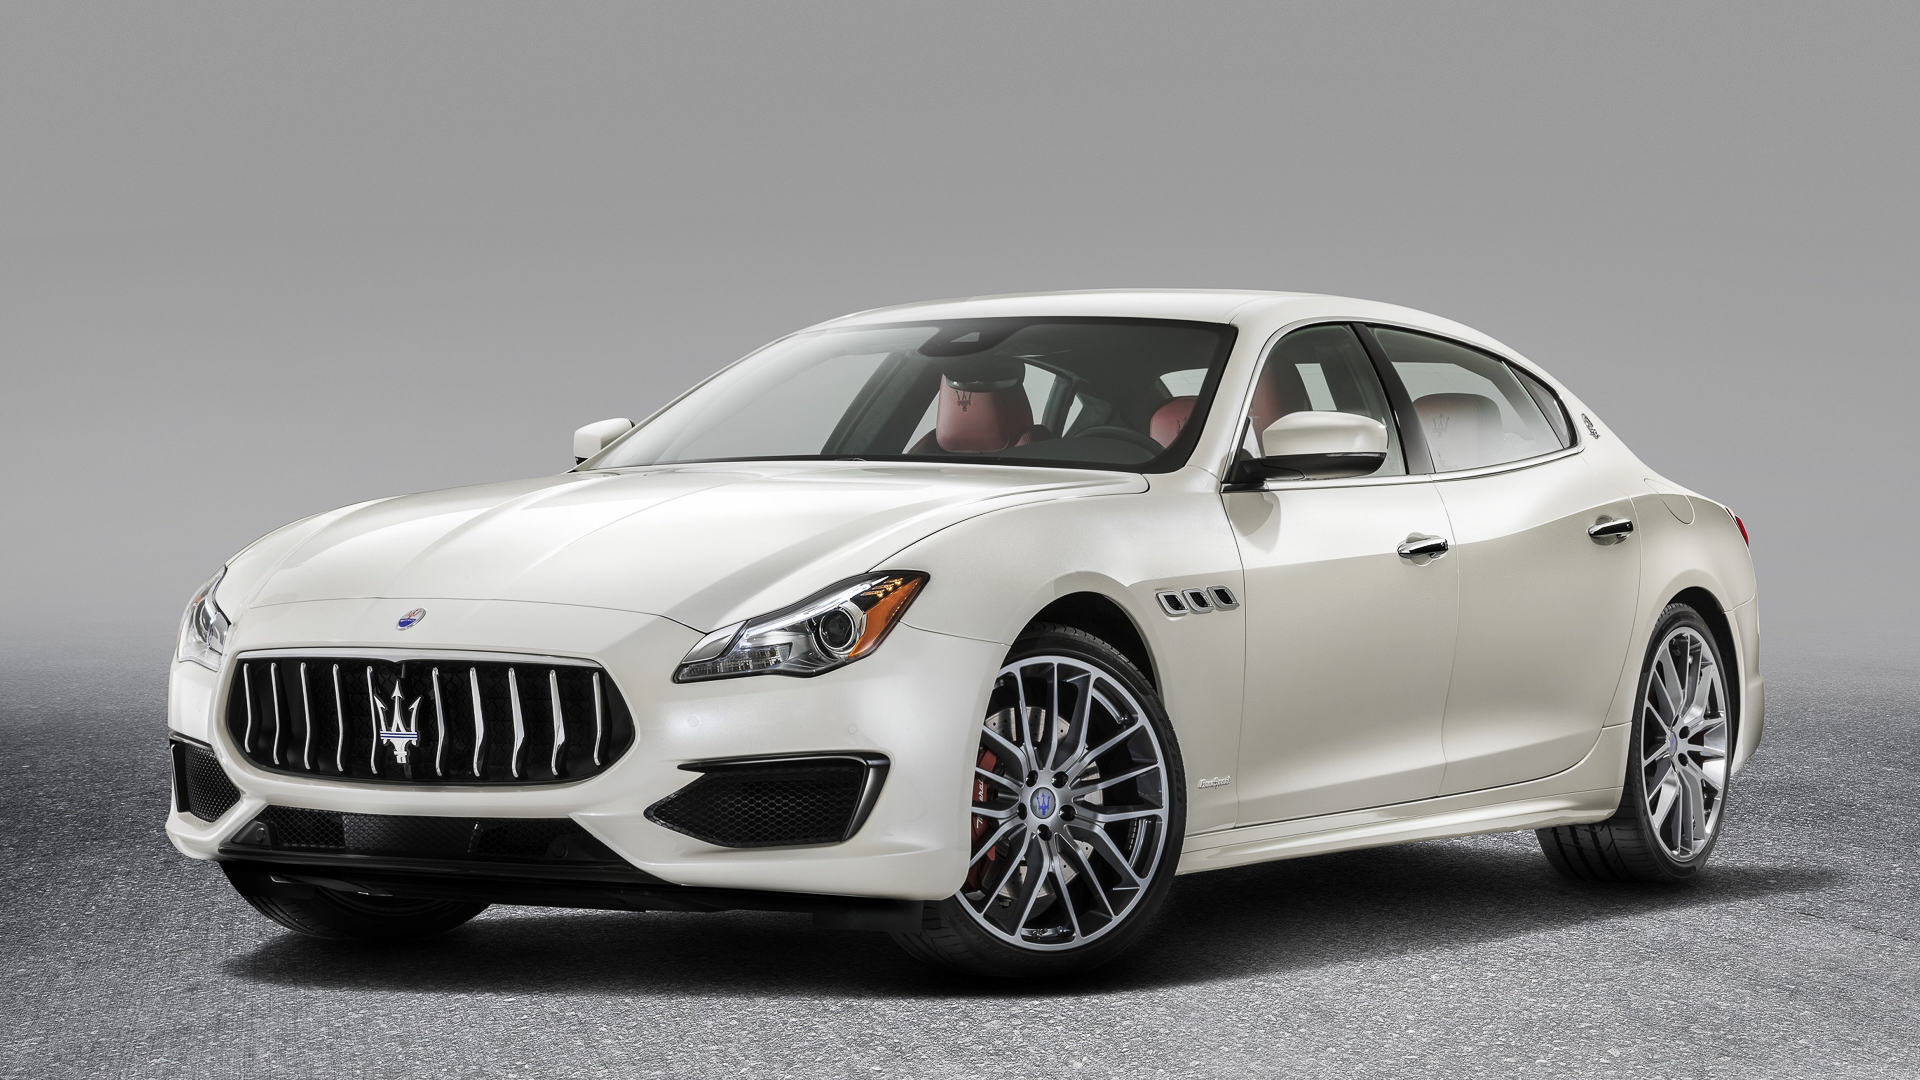 <p>The Maserati Quattroporte loses its value faster than other vehicles in its class.</p> <p>"Maserati means business for most people -- expensive, posh and sporty cars that turn heads. However, things are messier when you're the owner," Buzelis said. "In 2019, Business Insider calculated that Maserati Quattroporte suffered a whopping 72.2% depreciation over the first three years. Their performance numbers are poor, many materials are cheap and overall build quality is pathetic, so the Quattroporte is extremely overpriced. You can hardly find a worse car in the full-size luxury car market."</p>